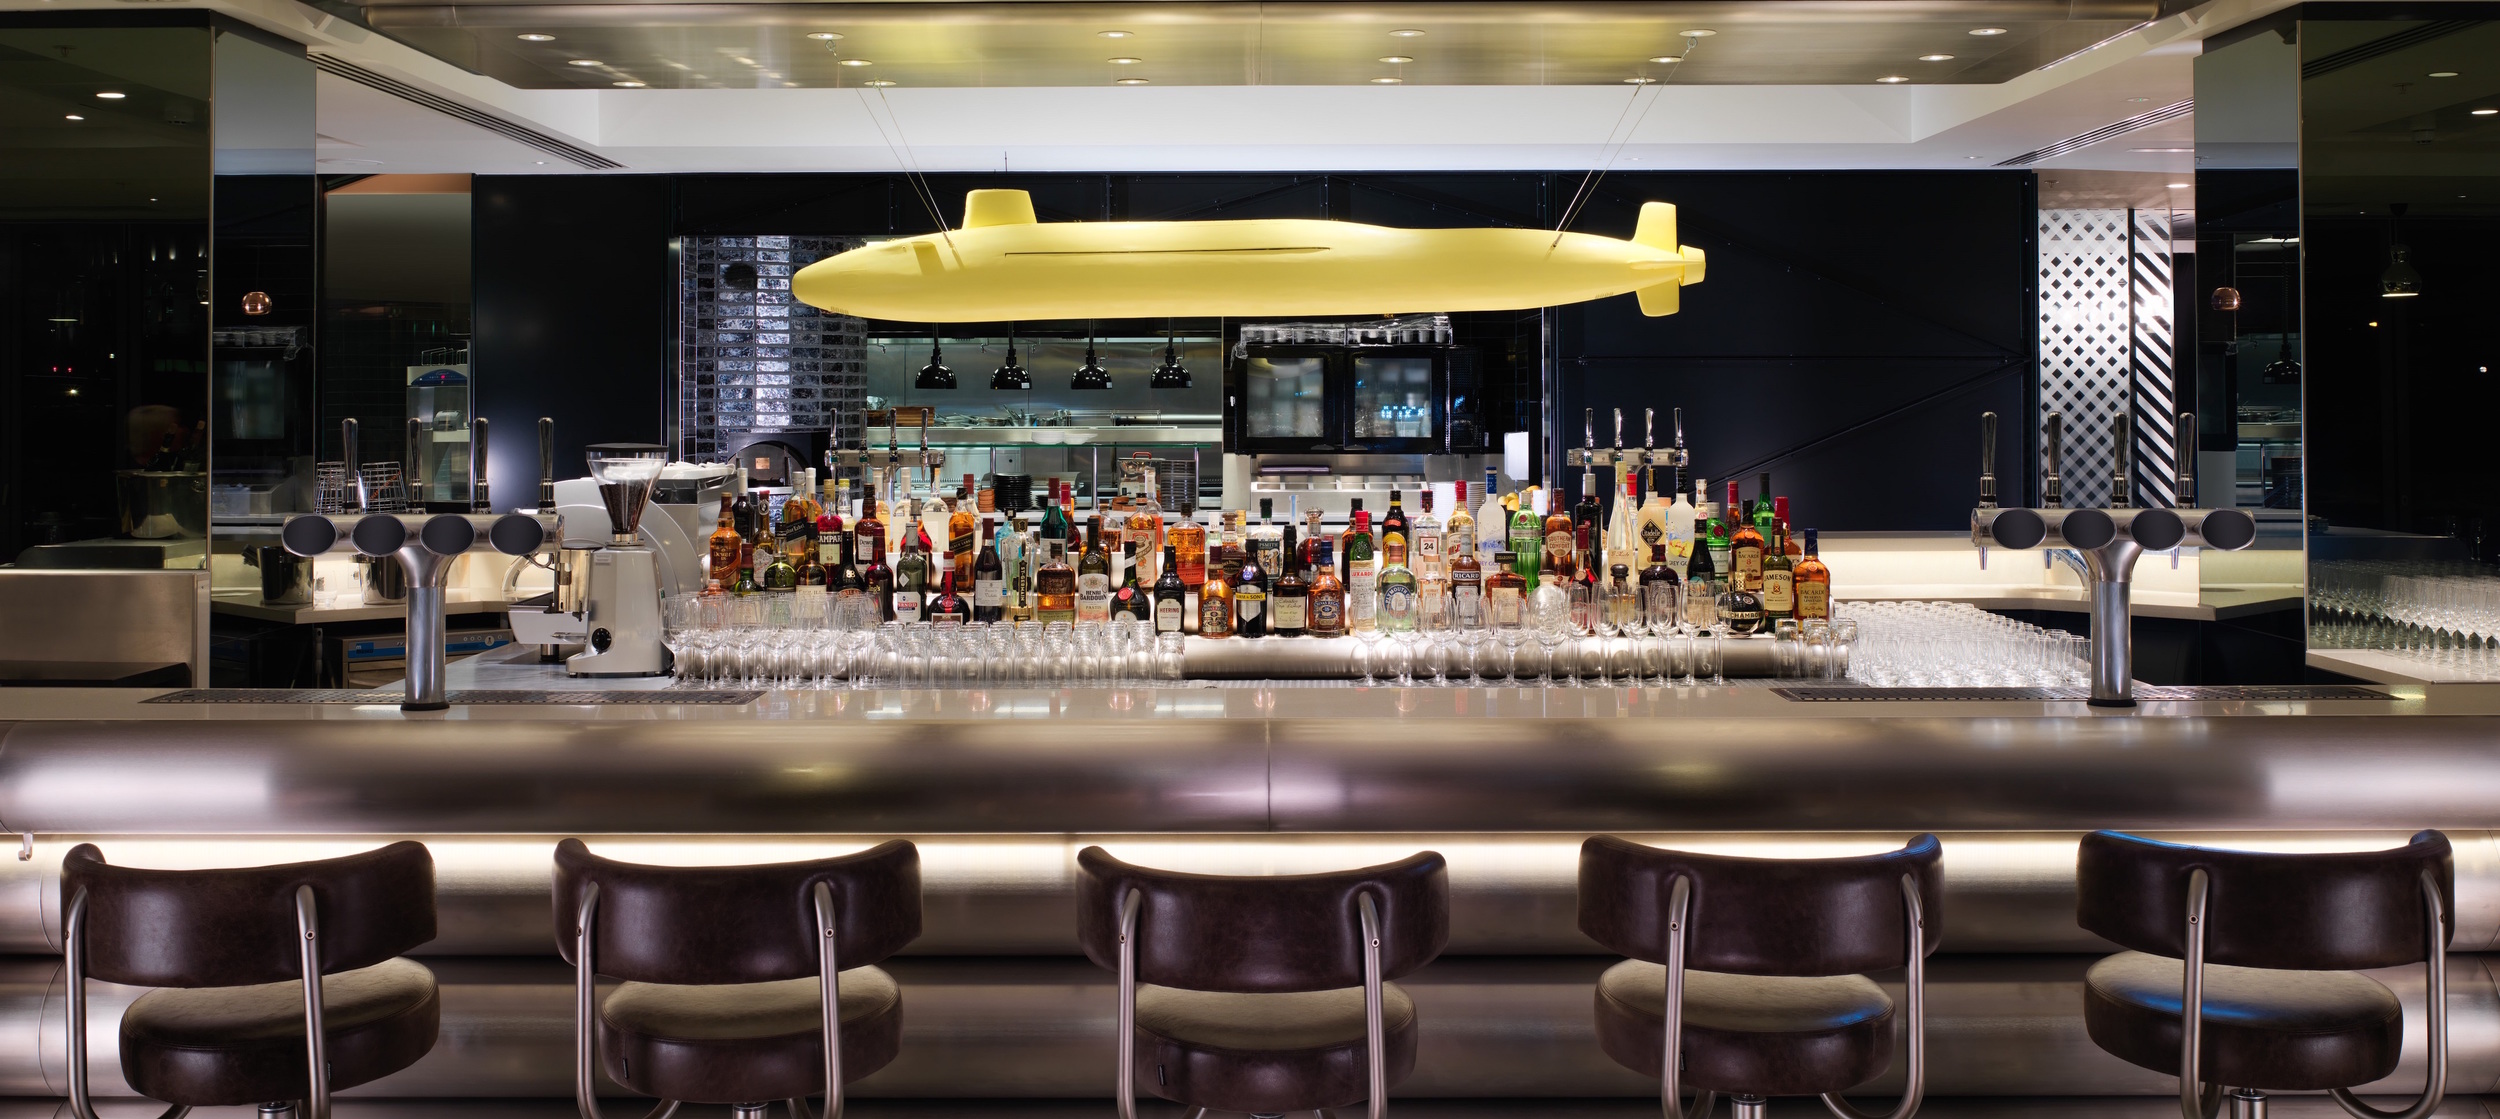 Sea Containers Bar.jpg